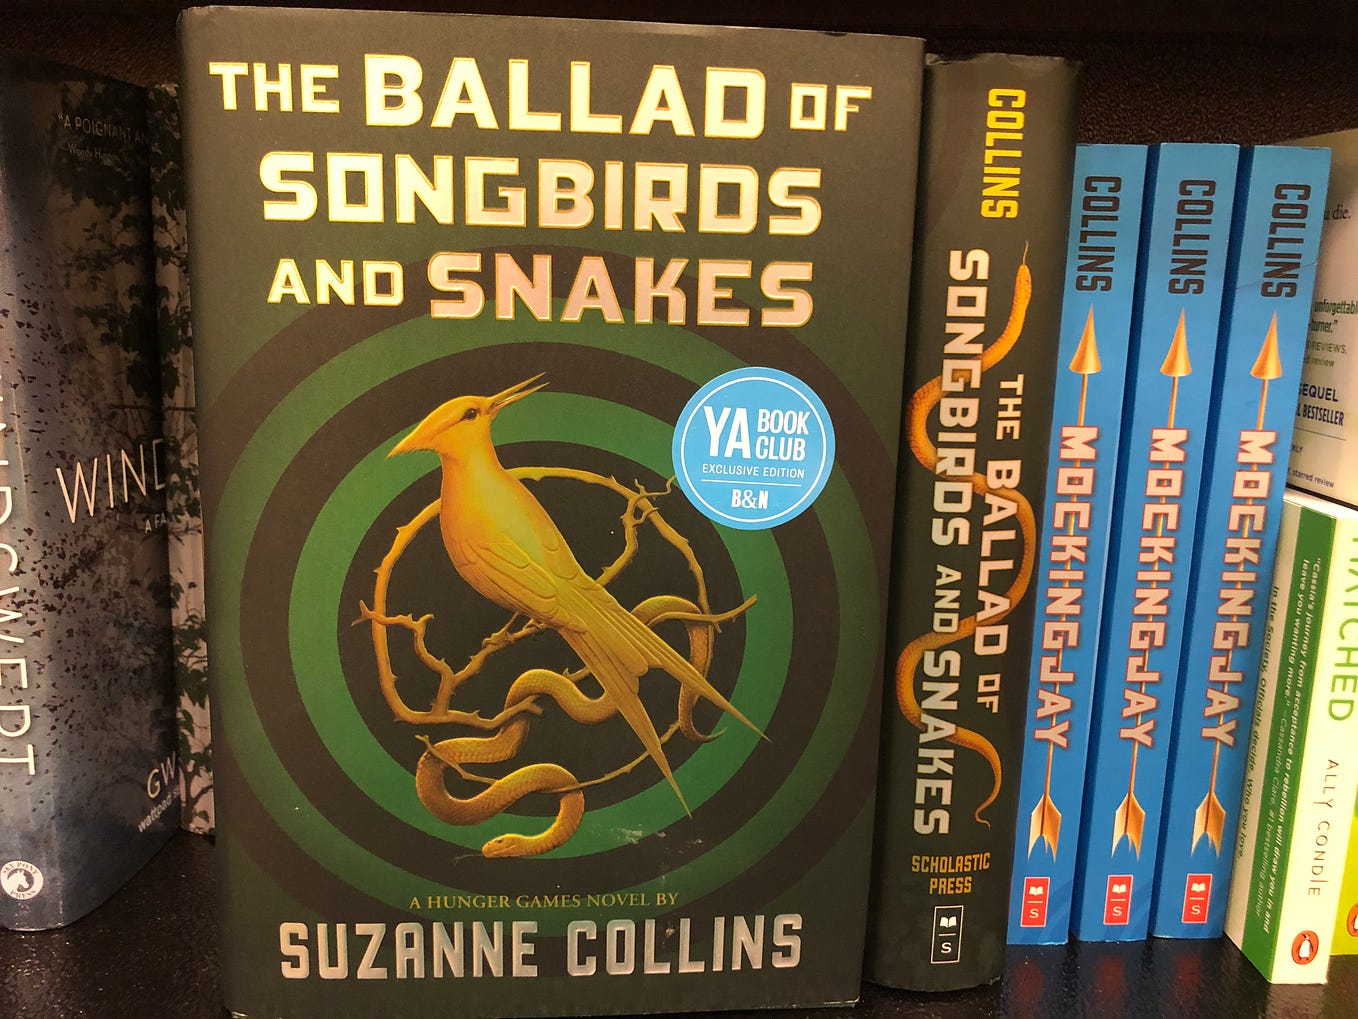 The Ballad of Songbirds and Snakes Connects to Current World Events